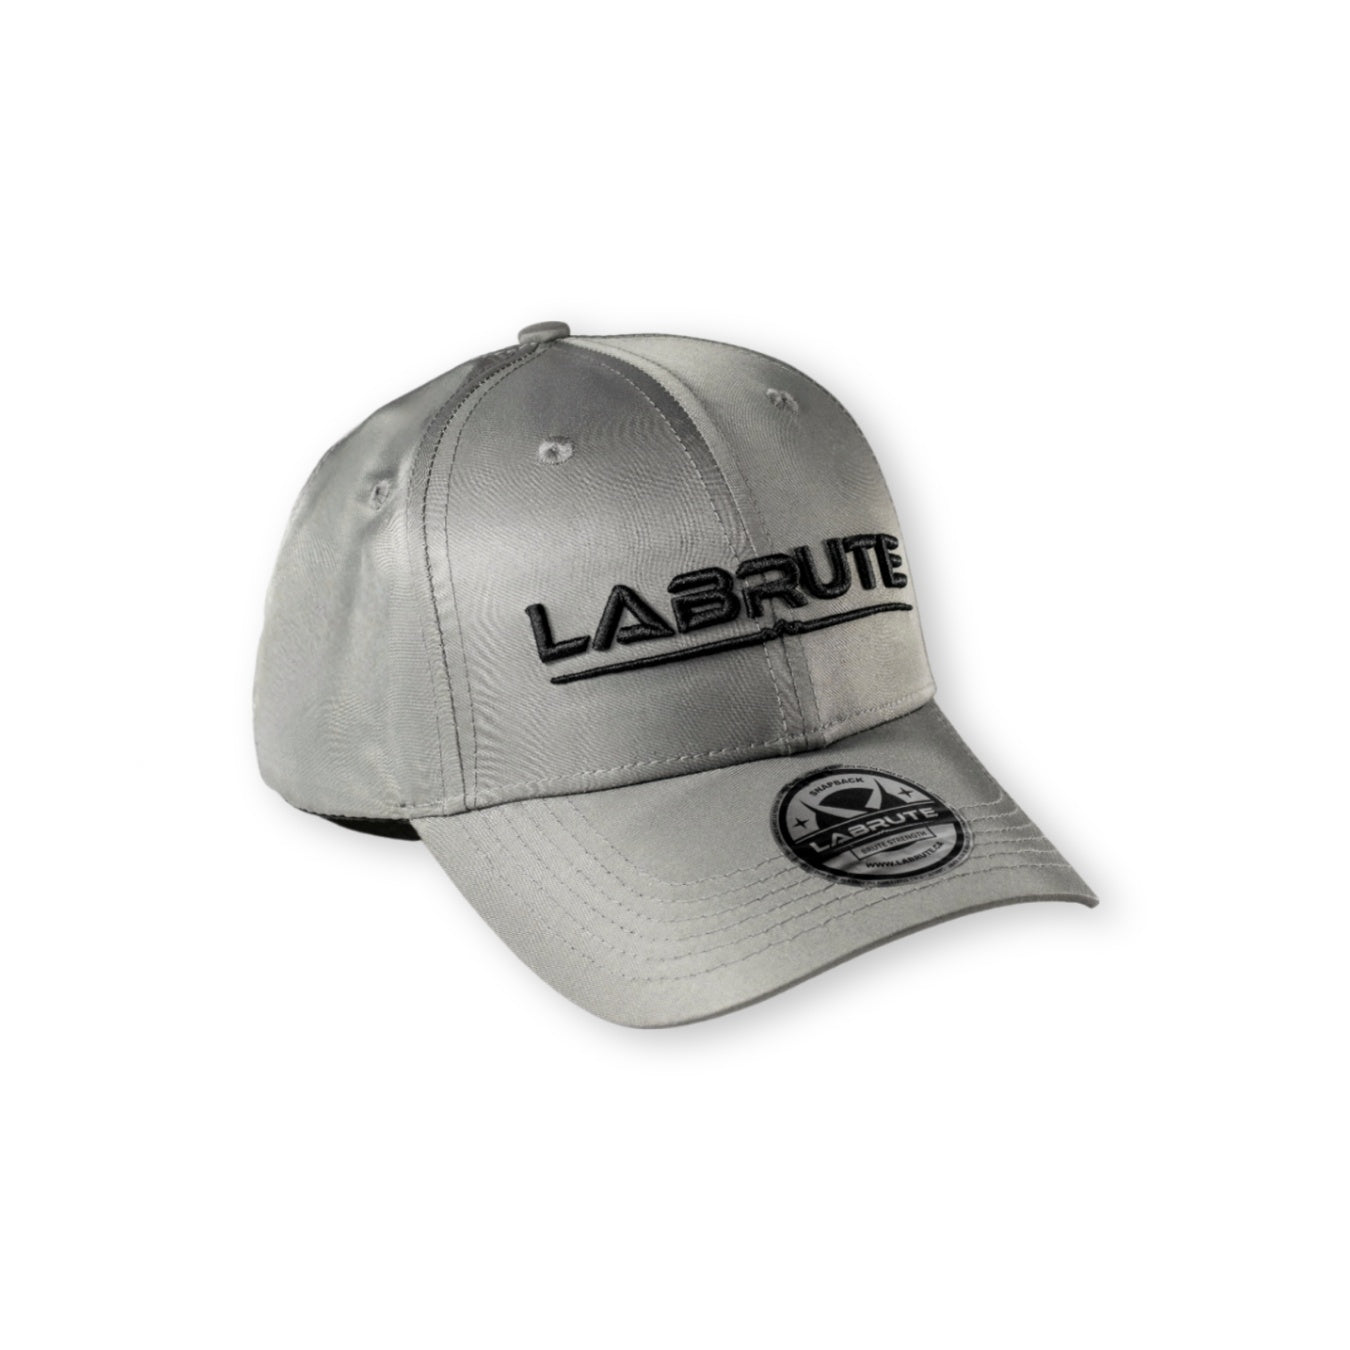 PREMIUM MEN'S SPORTSWEAR - LABRUTE Black FITTED CAP MADE IN RECYCLED NYLON